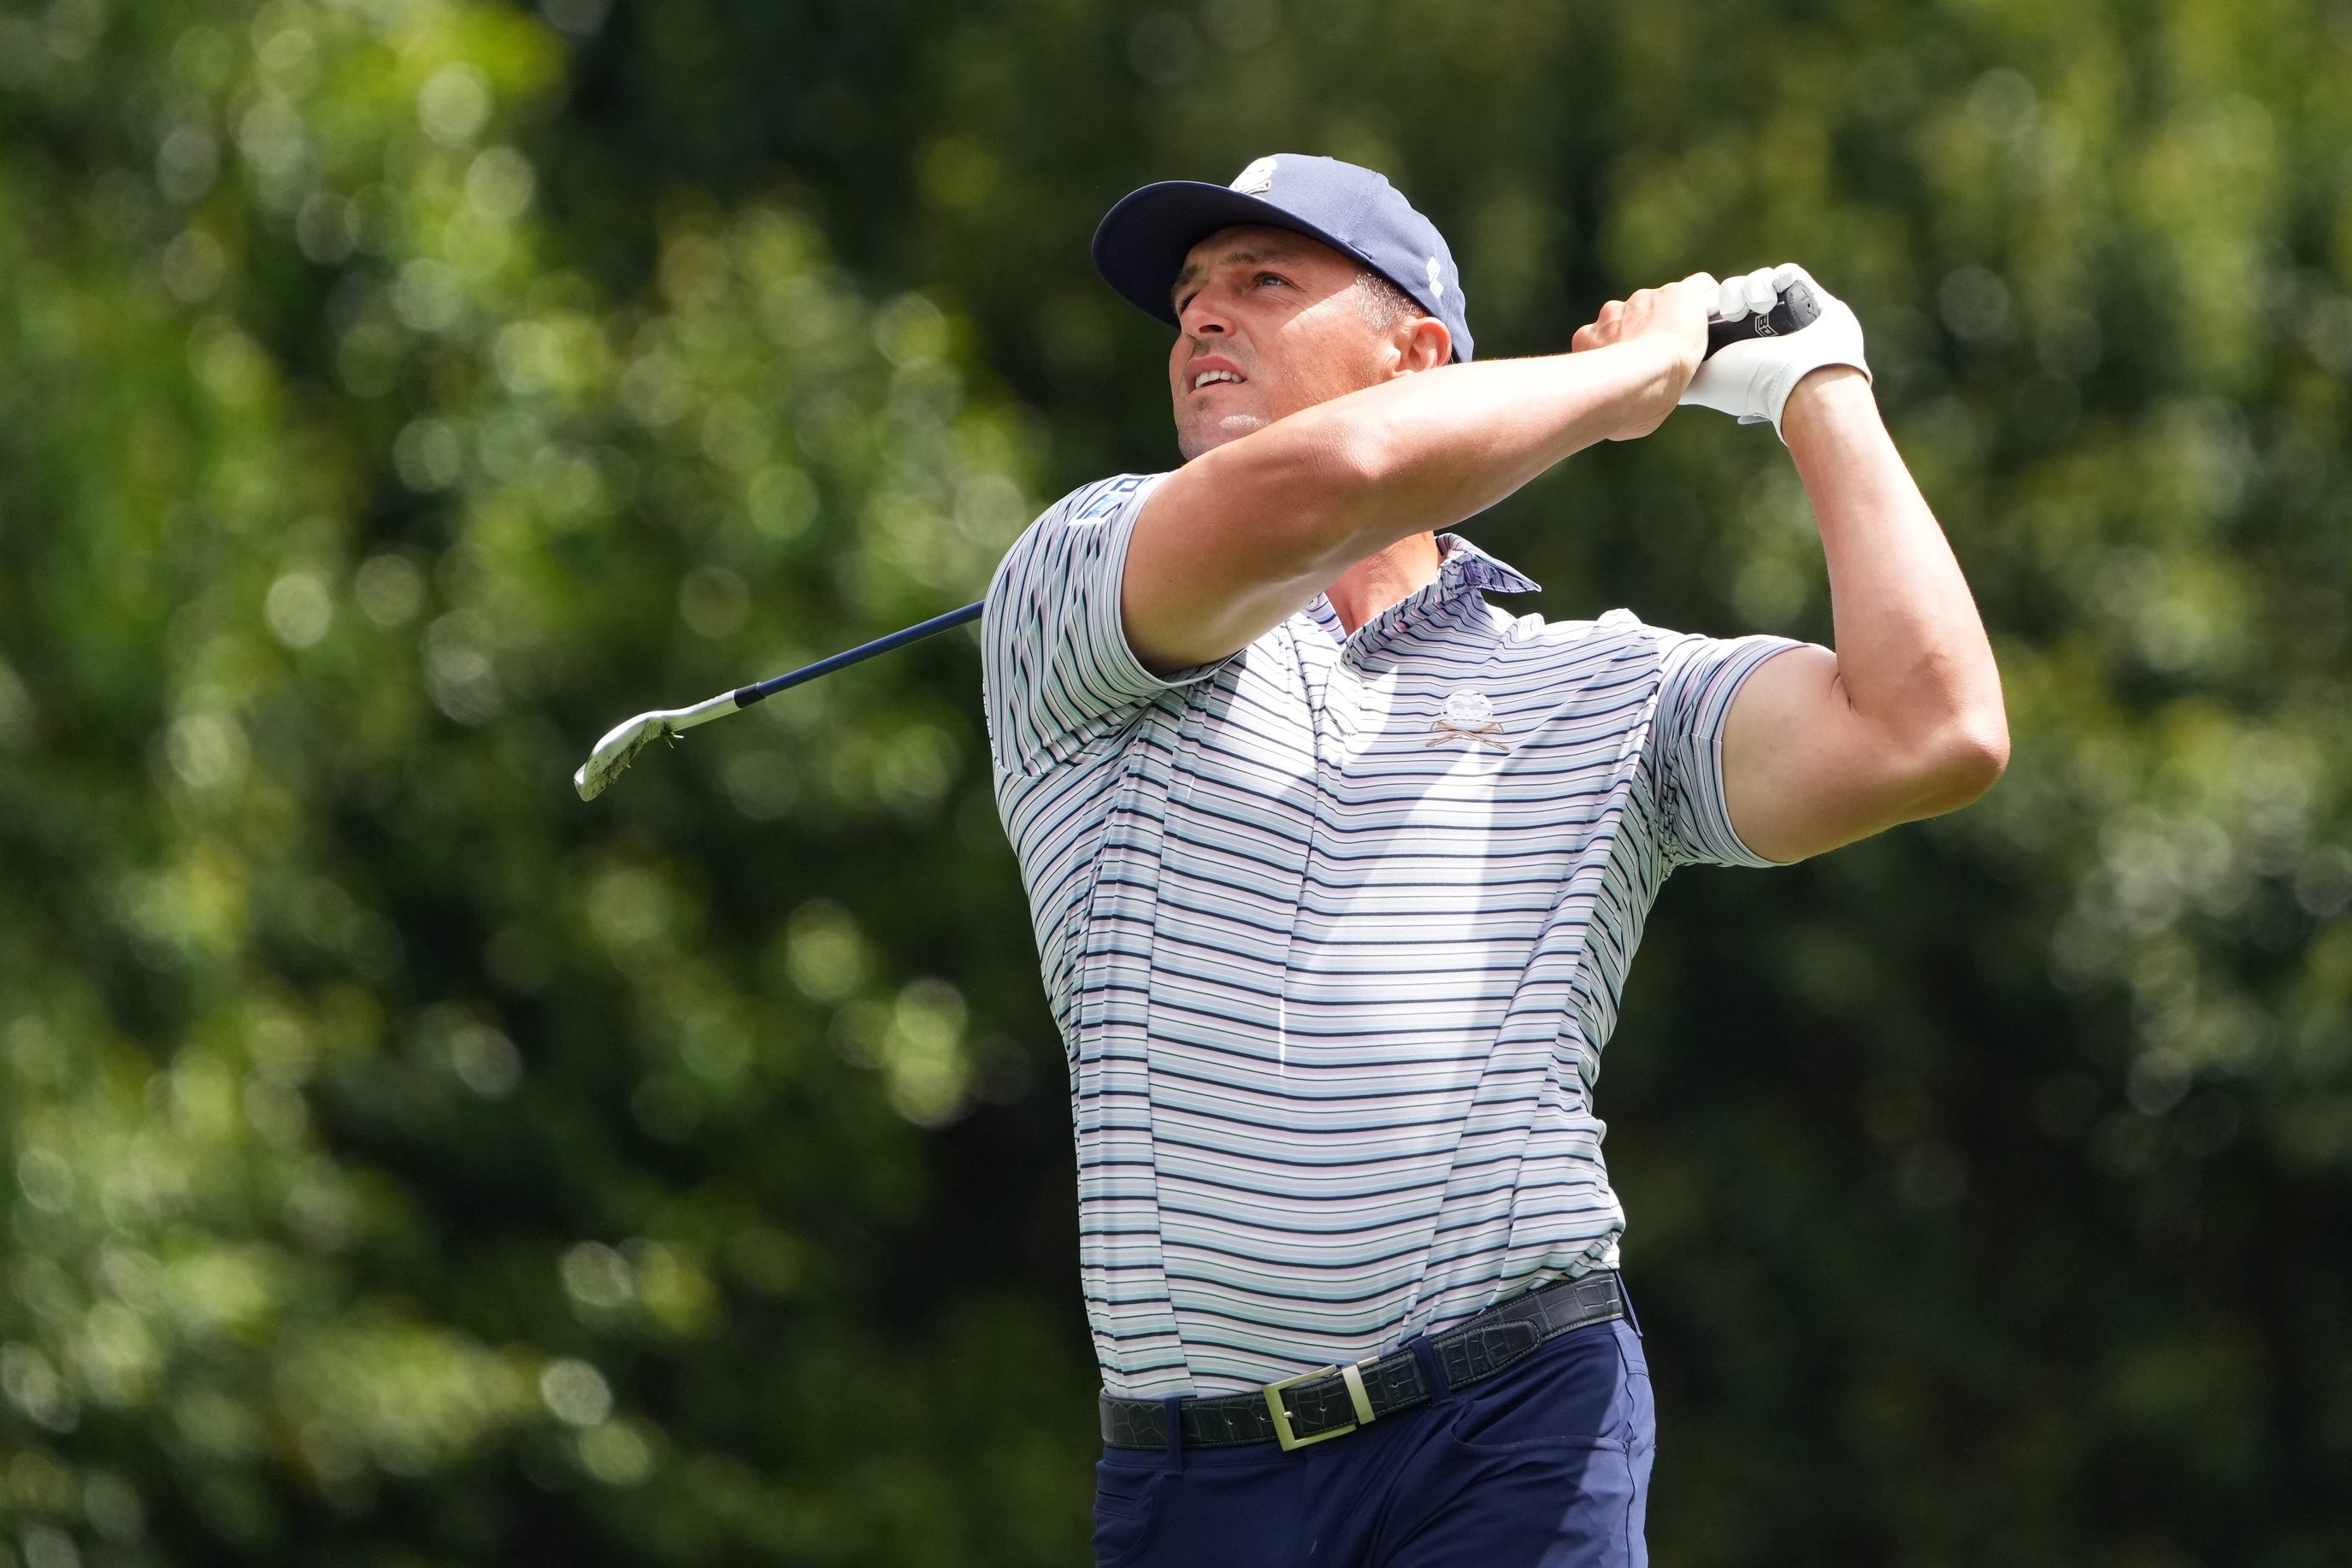 liv golf masters: results, scores leaderboard for liv tour as dechambeau finishes top 10